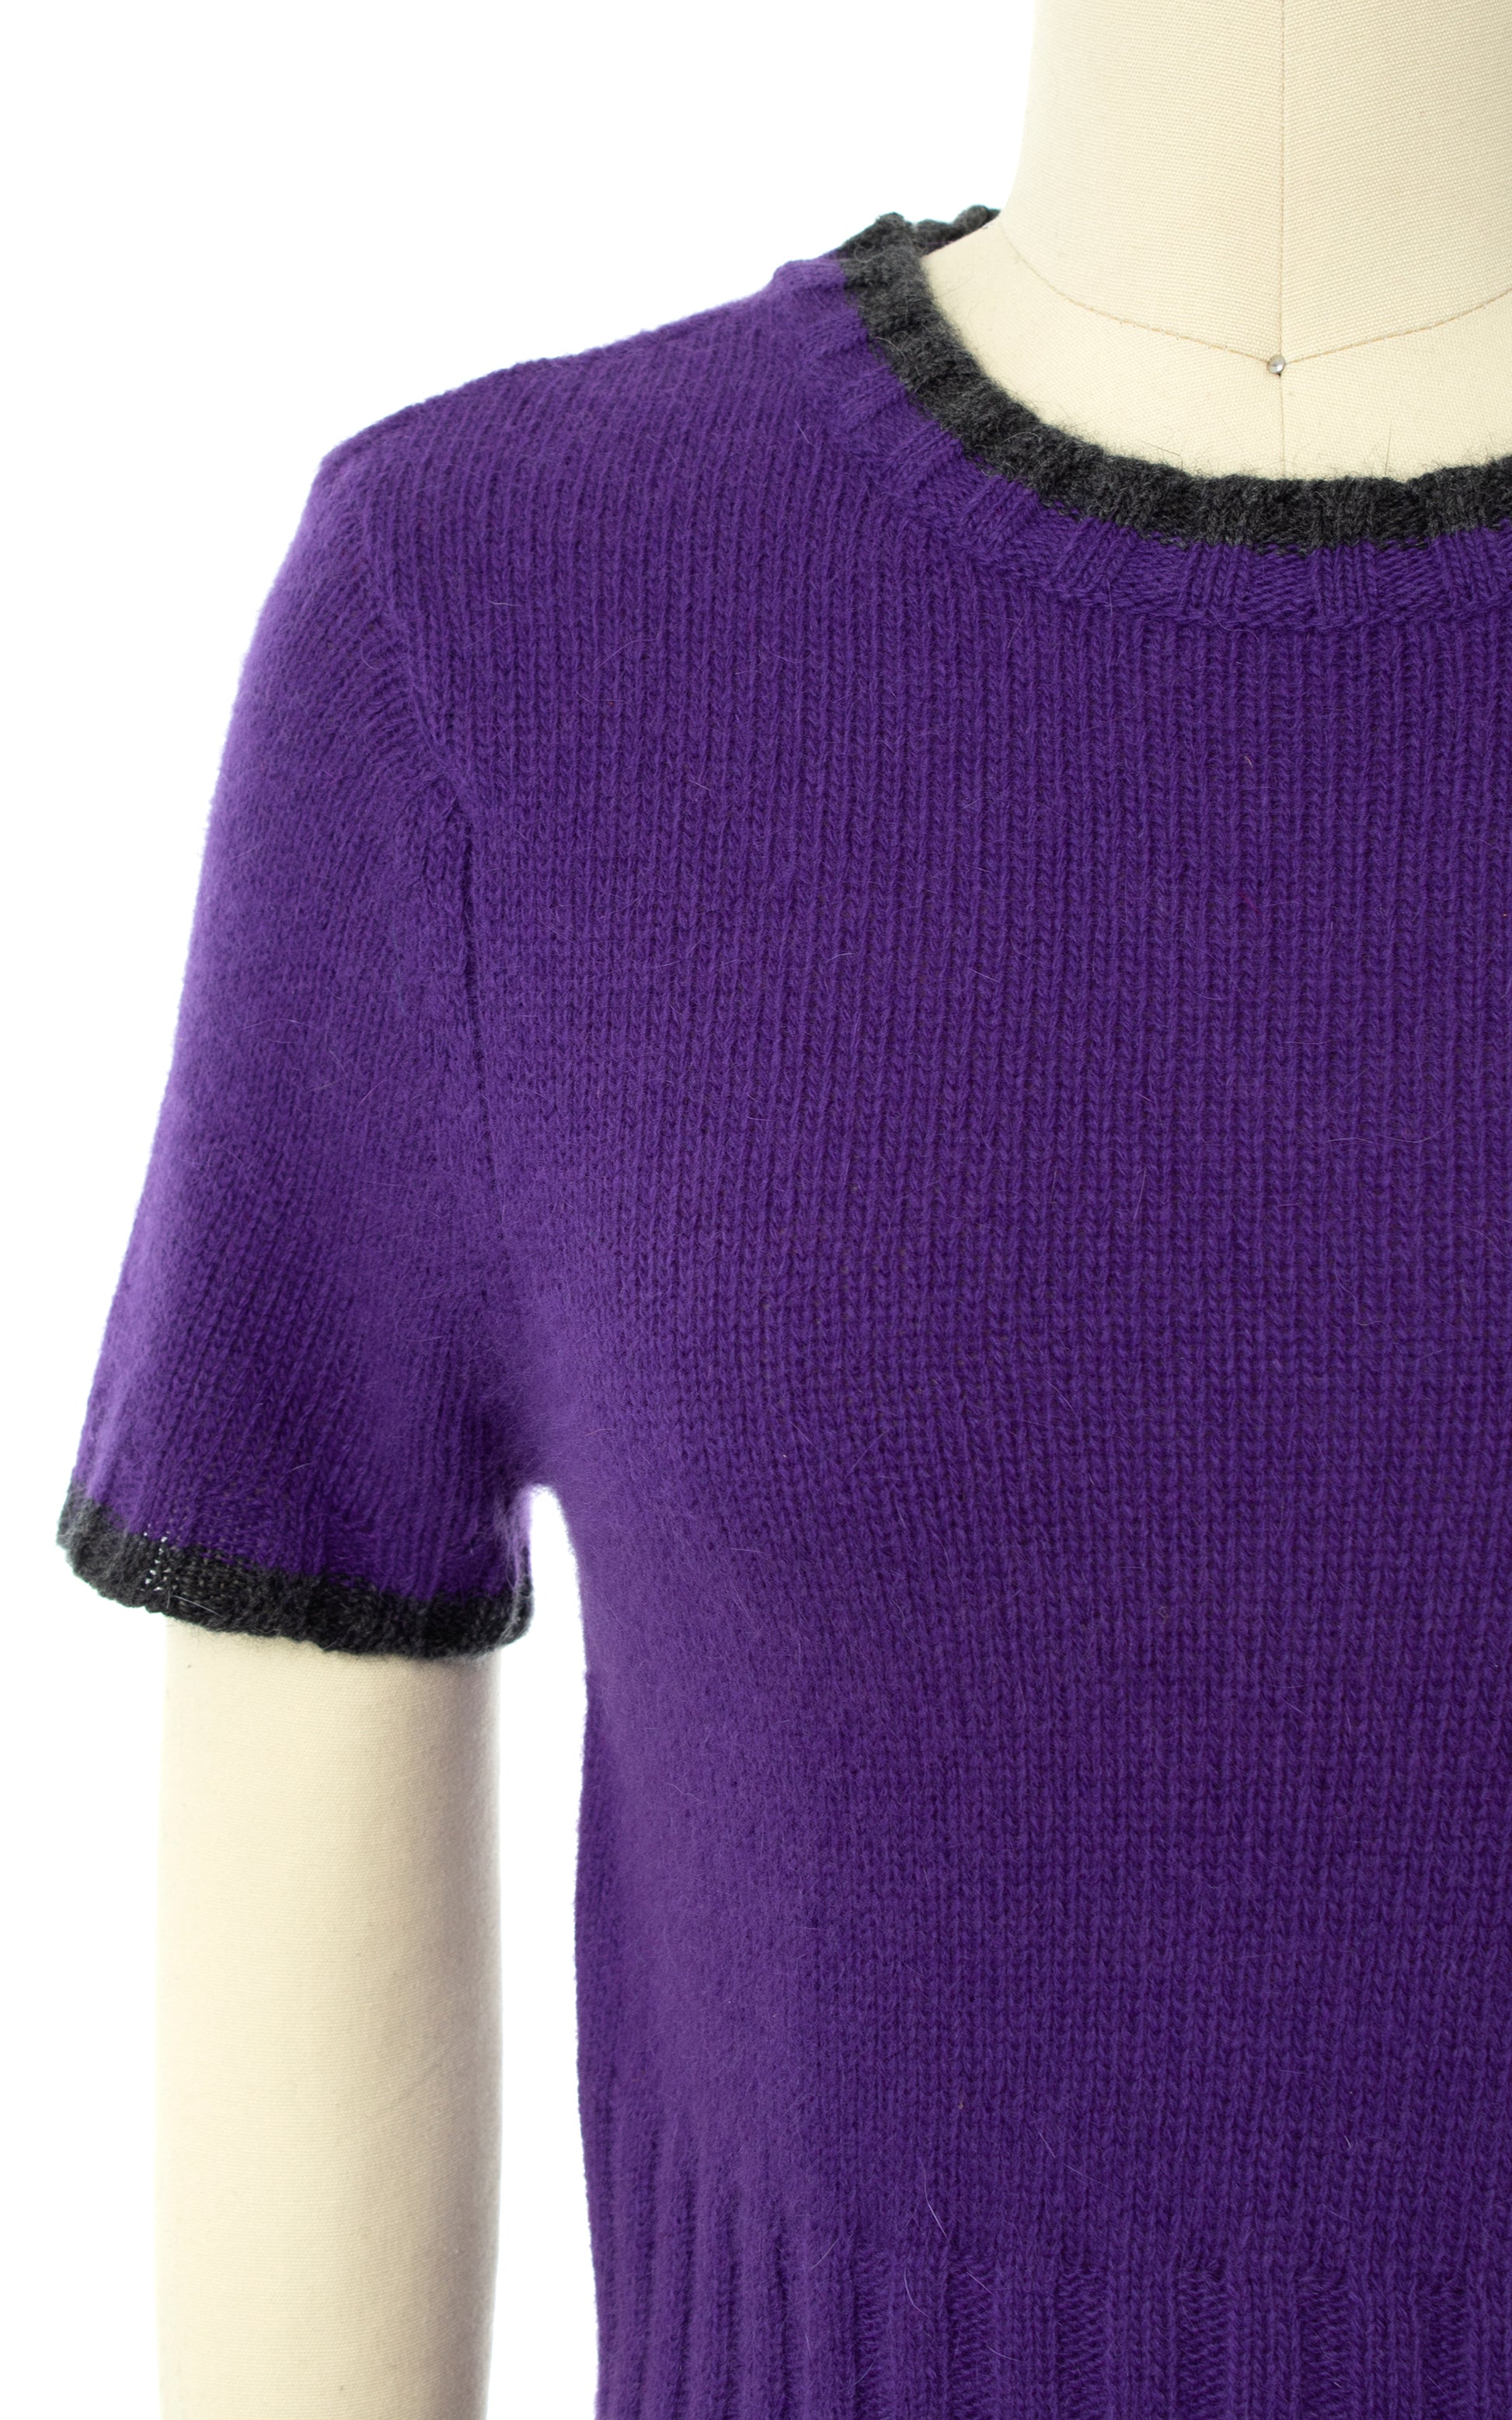 Vintage 1990s 90s DEADSTOCK Purple Knit Wool Angora Sweater Top | x-small/small | Birthday Life Vintage